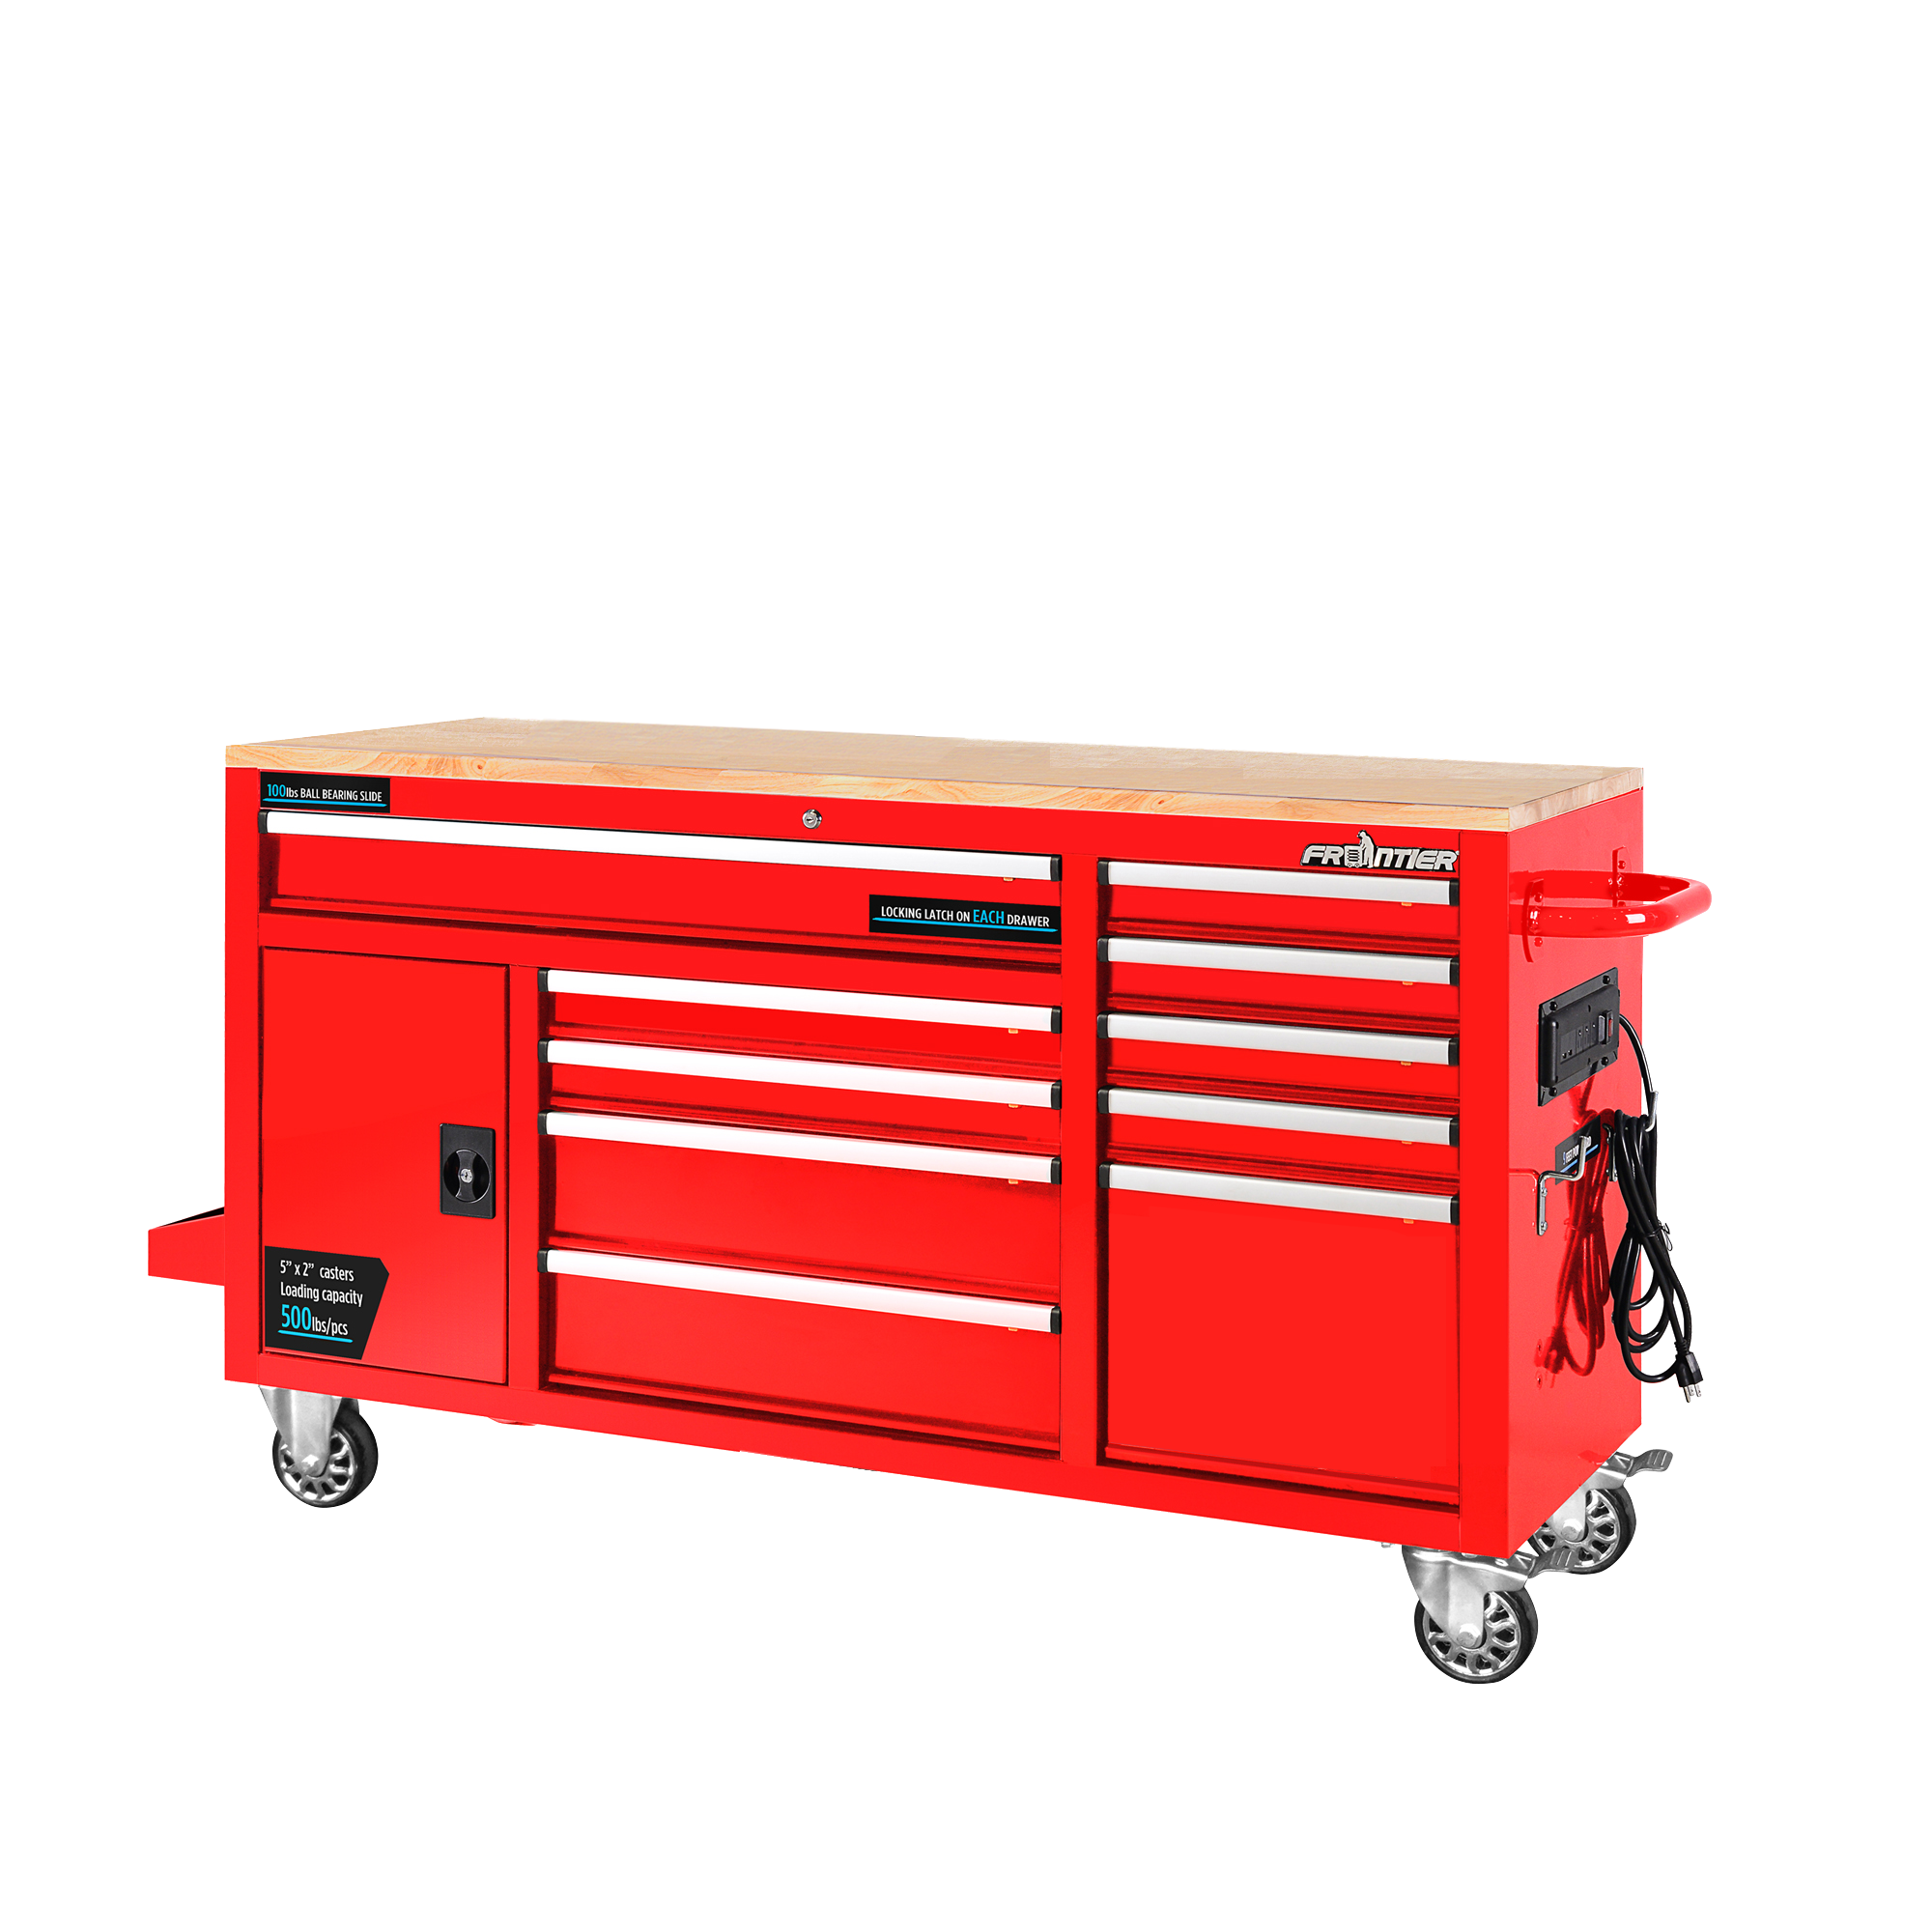 FRONTIER 62-inch W x 37-inch H x 22-inch D, Heavy Duty Mobile tool chest, tool cabinet with 10 drawers in Red - image 1 of 4